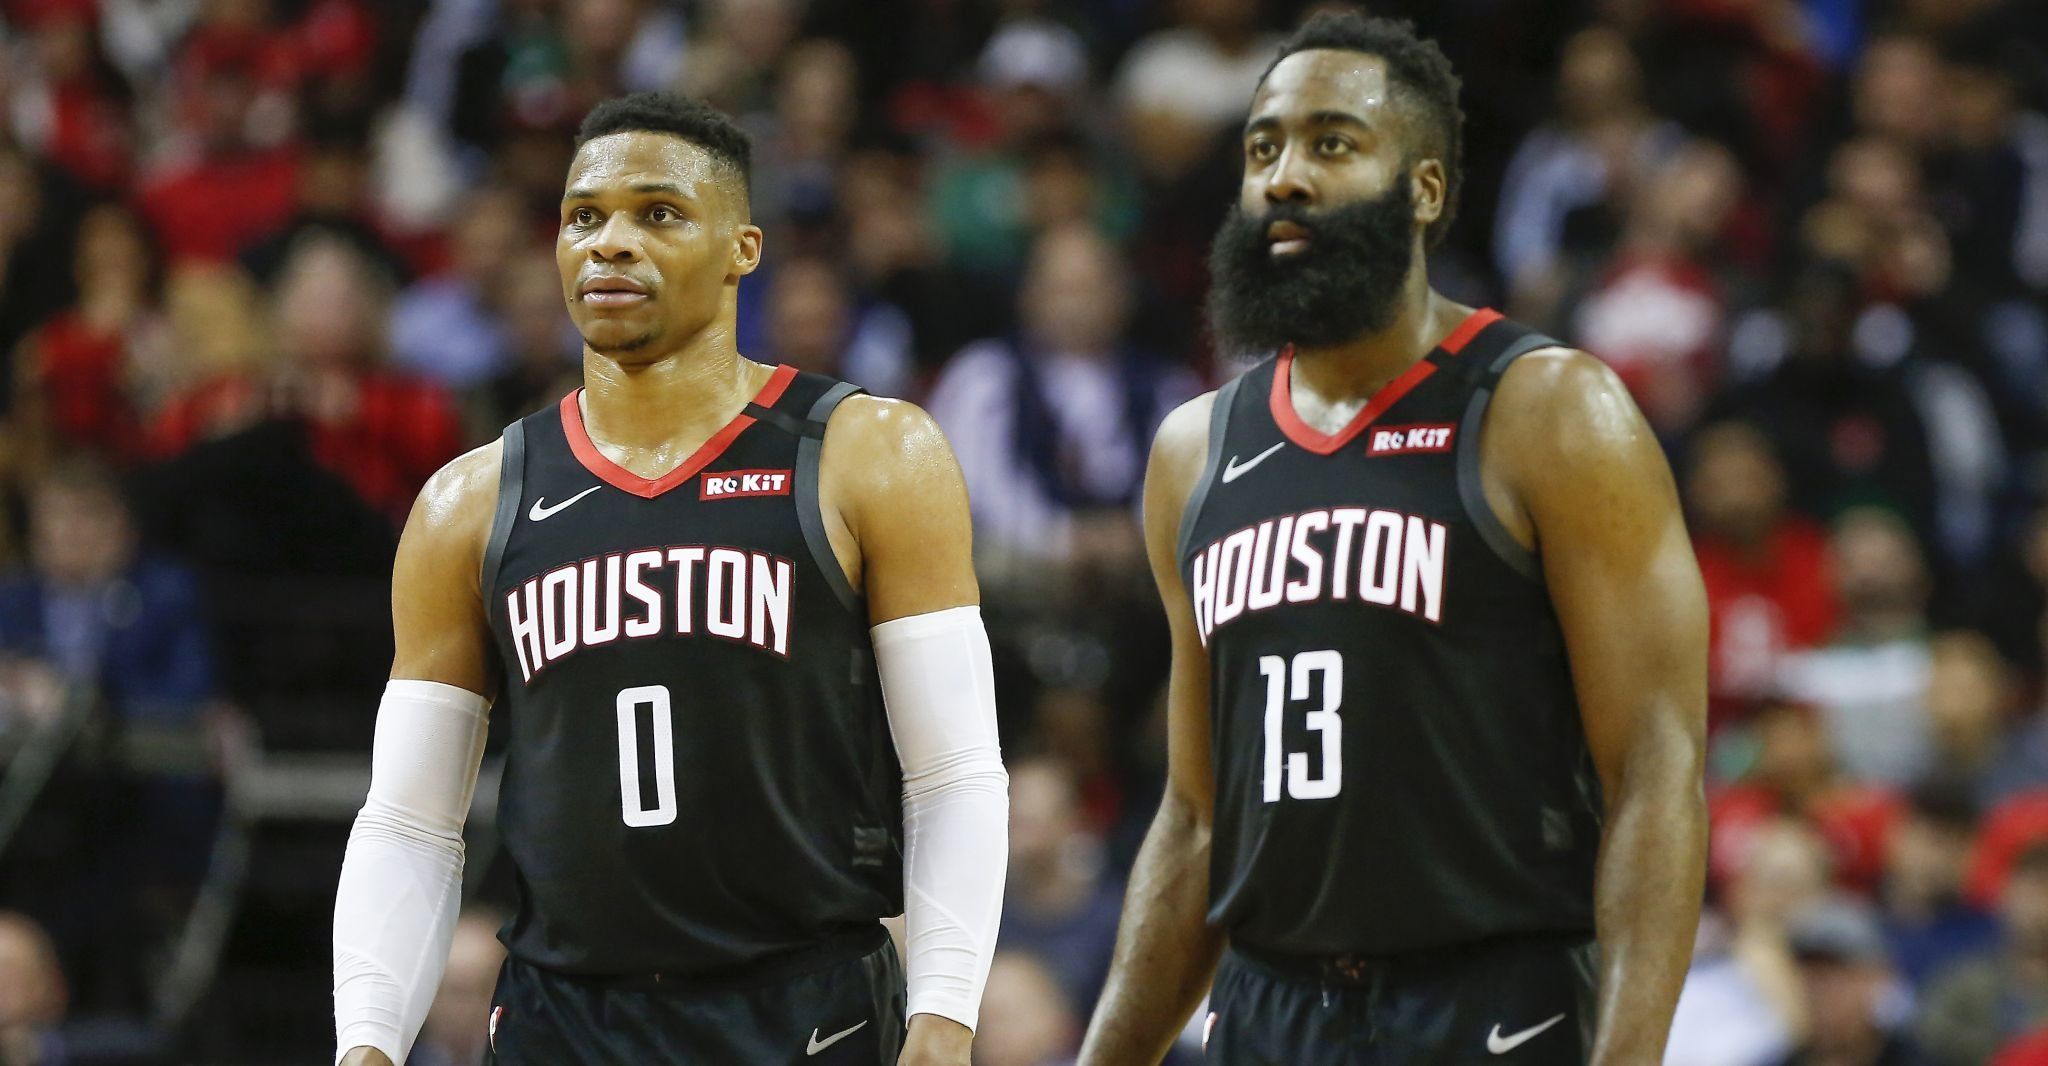 Houston Rockets guards Russell Westbrook and James Harden stand together at mid-court.